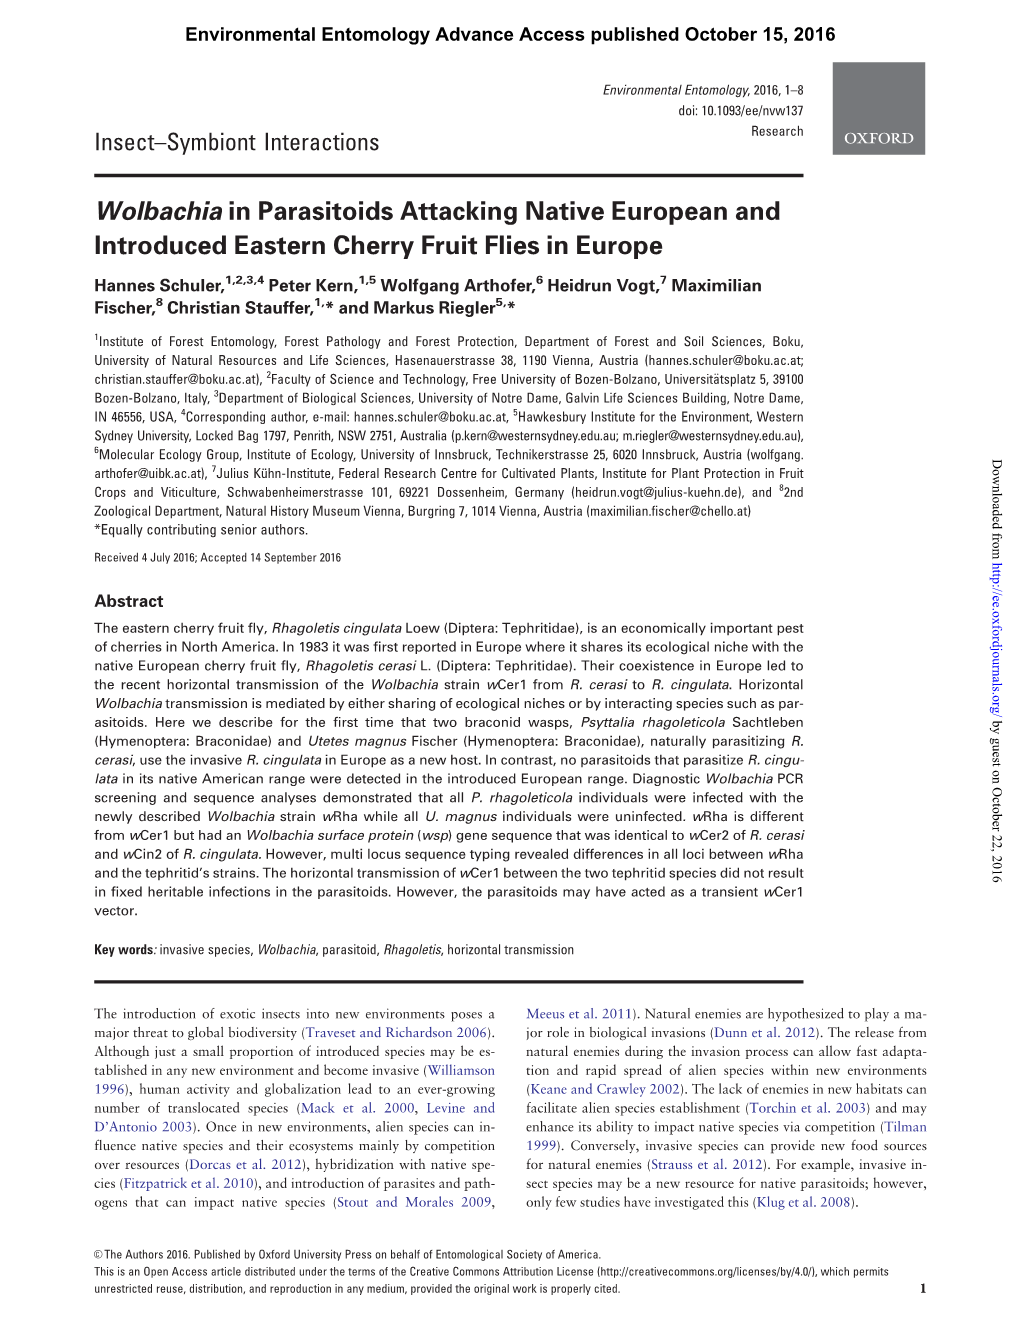 Wolbachia in Parasitoids Attacking Native European and Introduced Eastern Cherry Fruit Flies in Europe